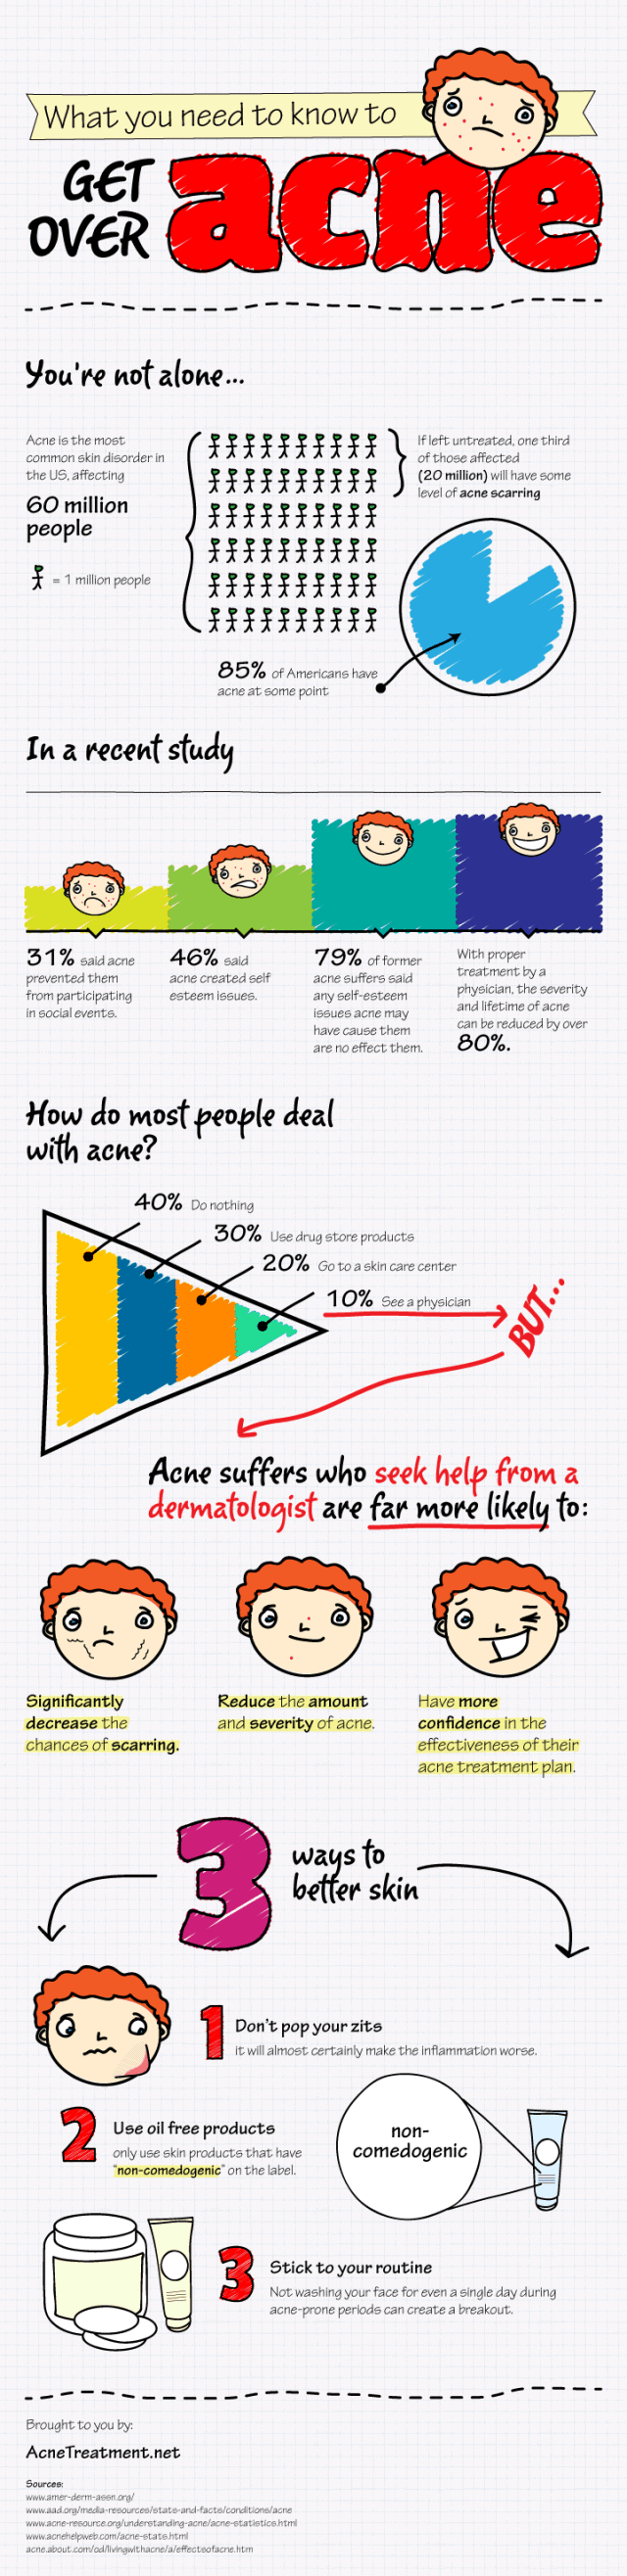 http://dailyinfographic.com/wp-content/uploads/2012/03/get-over-acne-640x2631.png